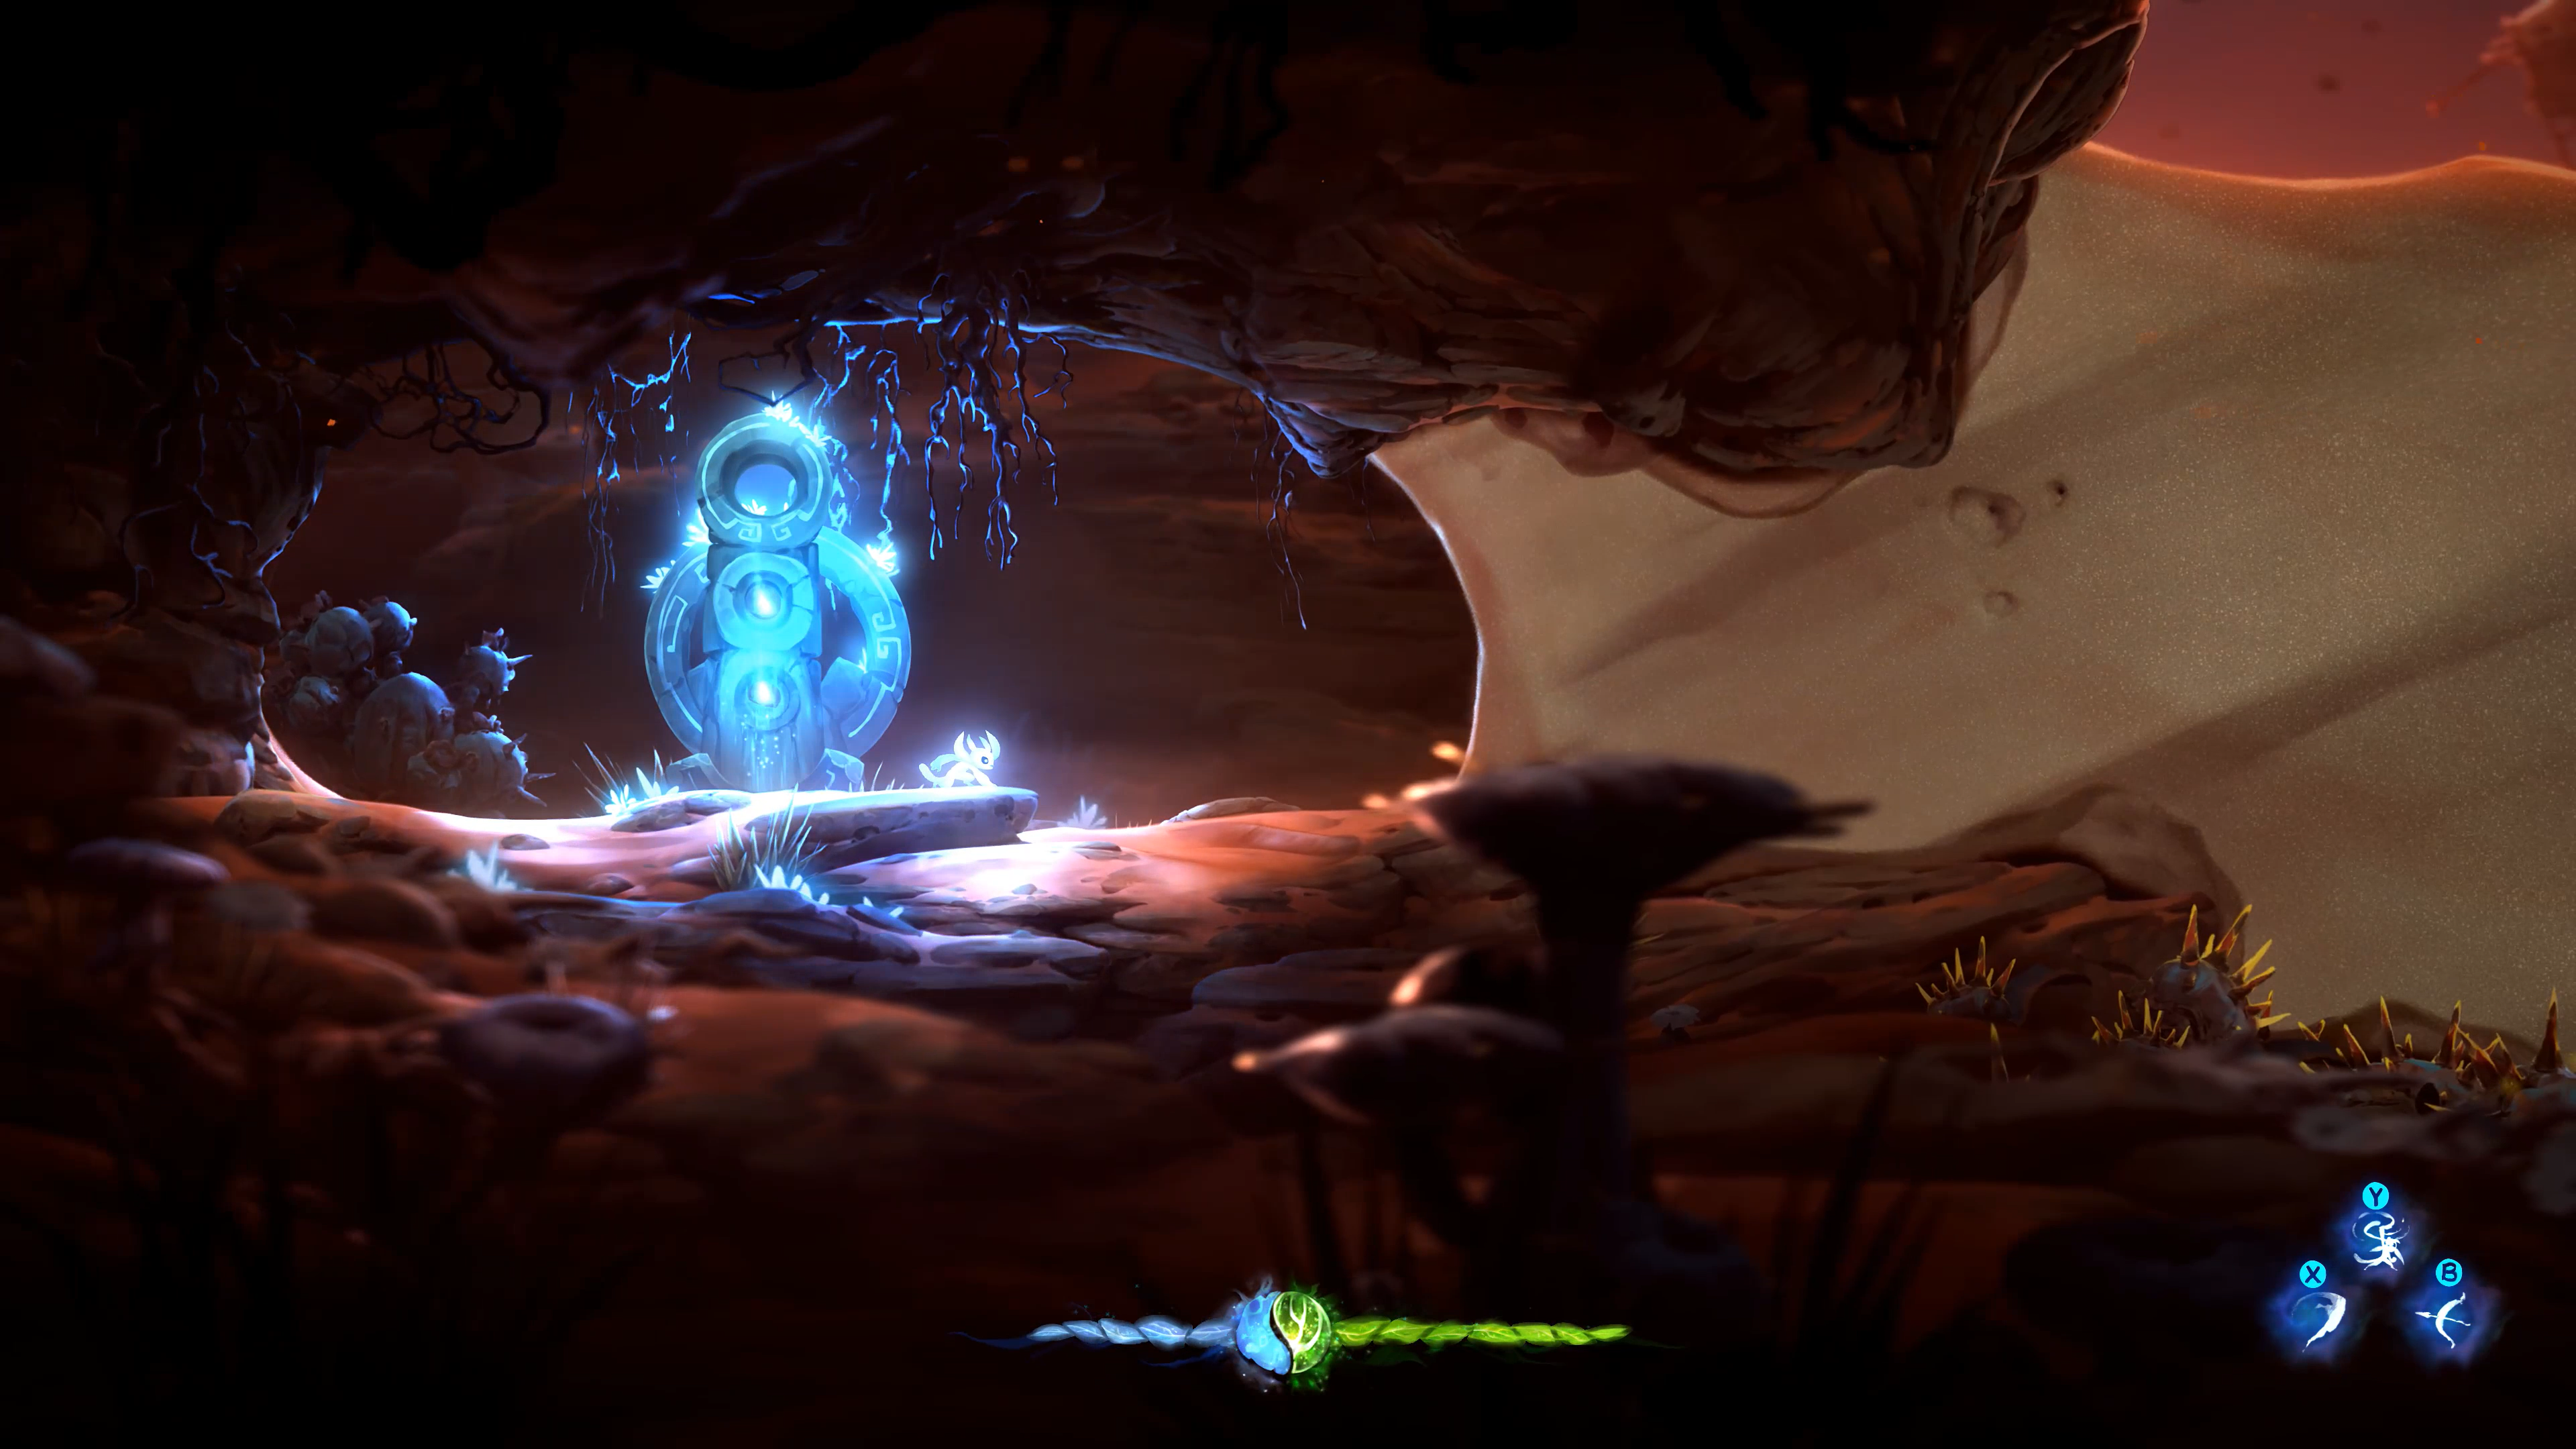 ori and thw blind forest dash